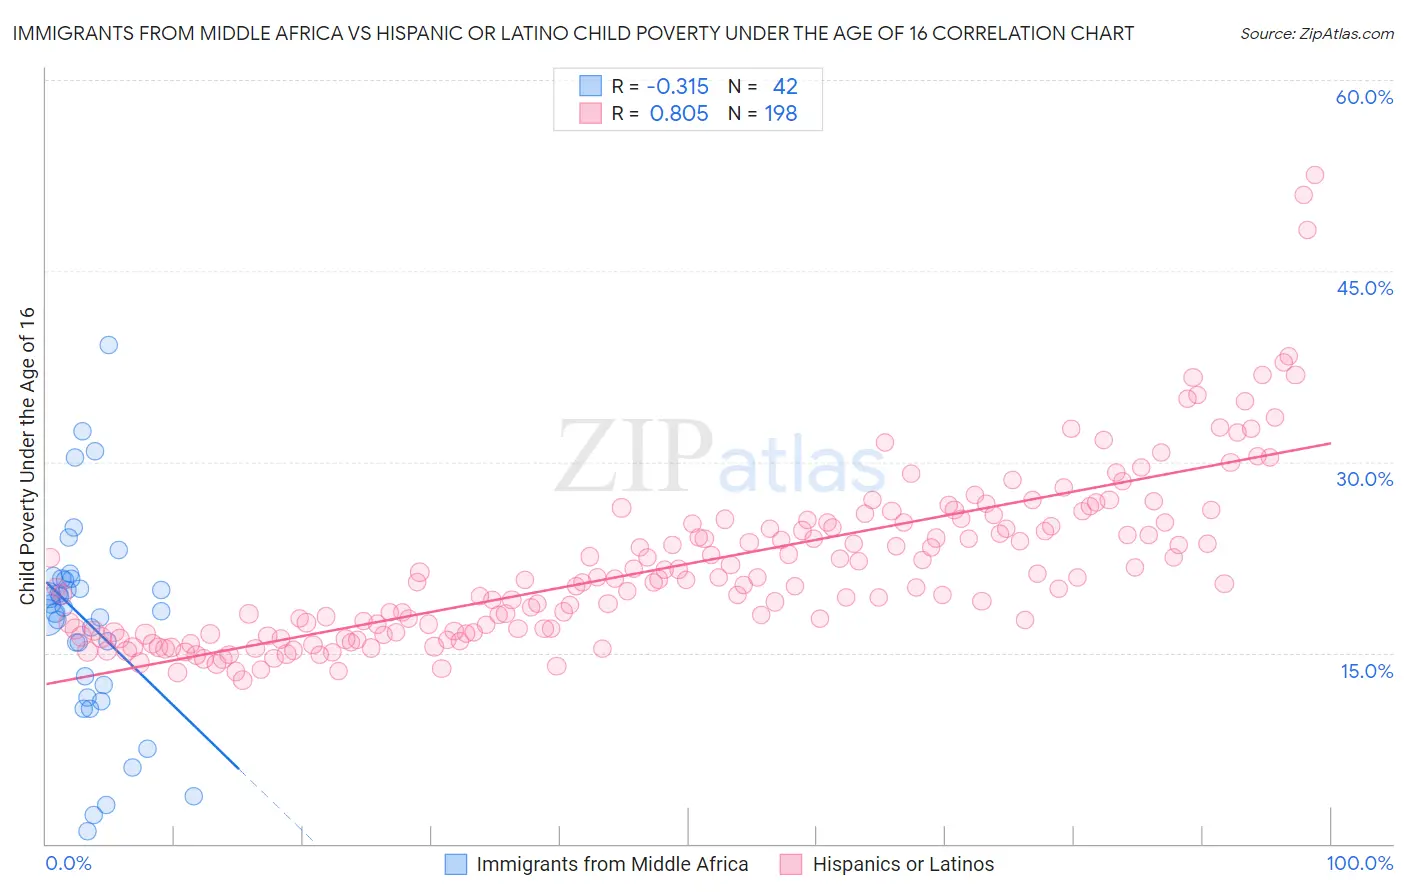 Immigrants from Middle Africa vs Hispanic or Latino Child Poverty Under the Age of 16